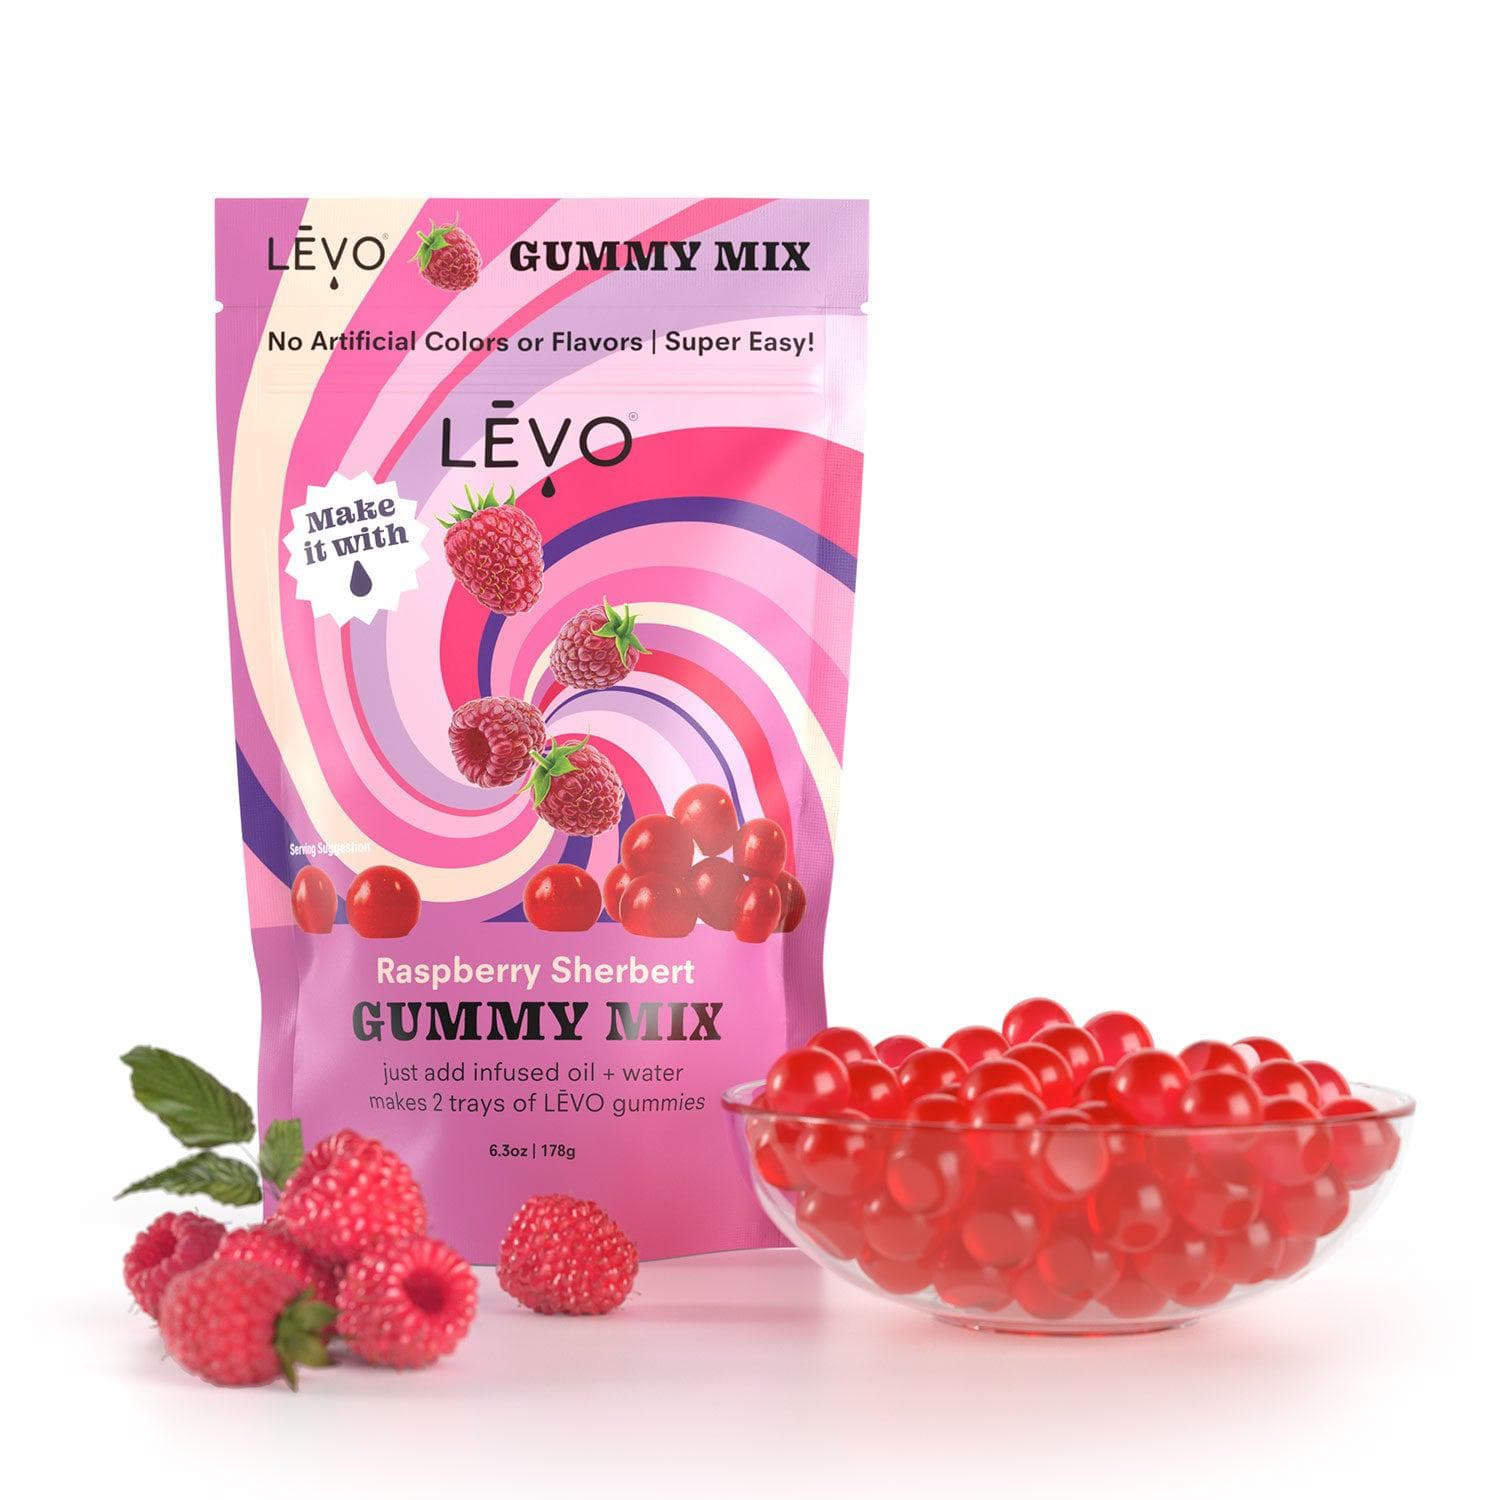 MAKING INFUSED GUMMY WORMS WITH AVB, using the LEVO C